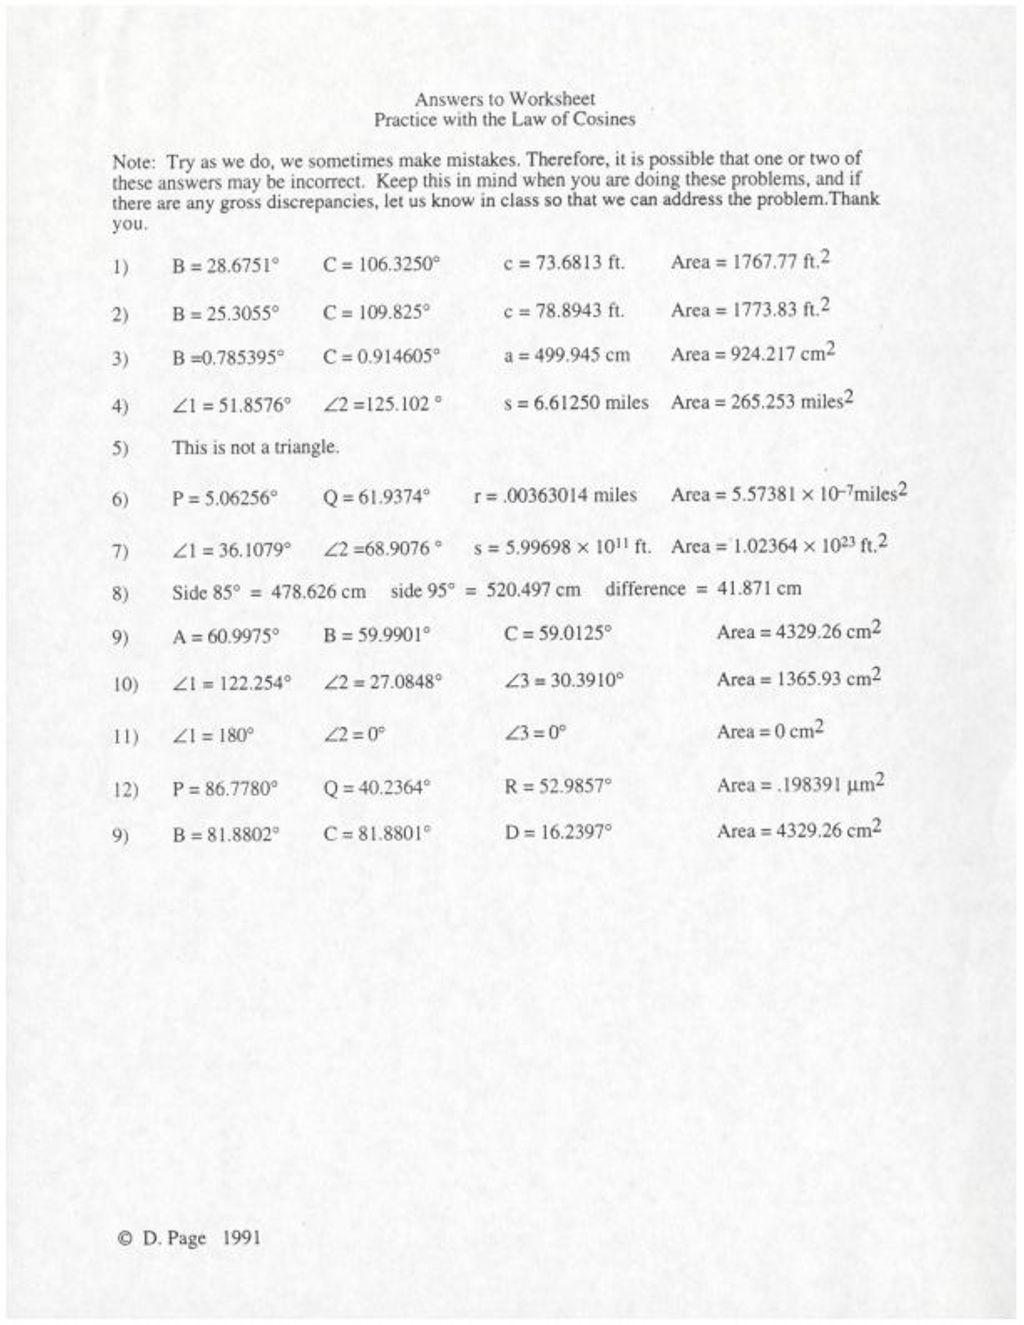 Miniature of Answers to Worksheet Practice with the Law of Cosines (1991)